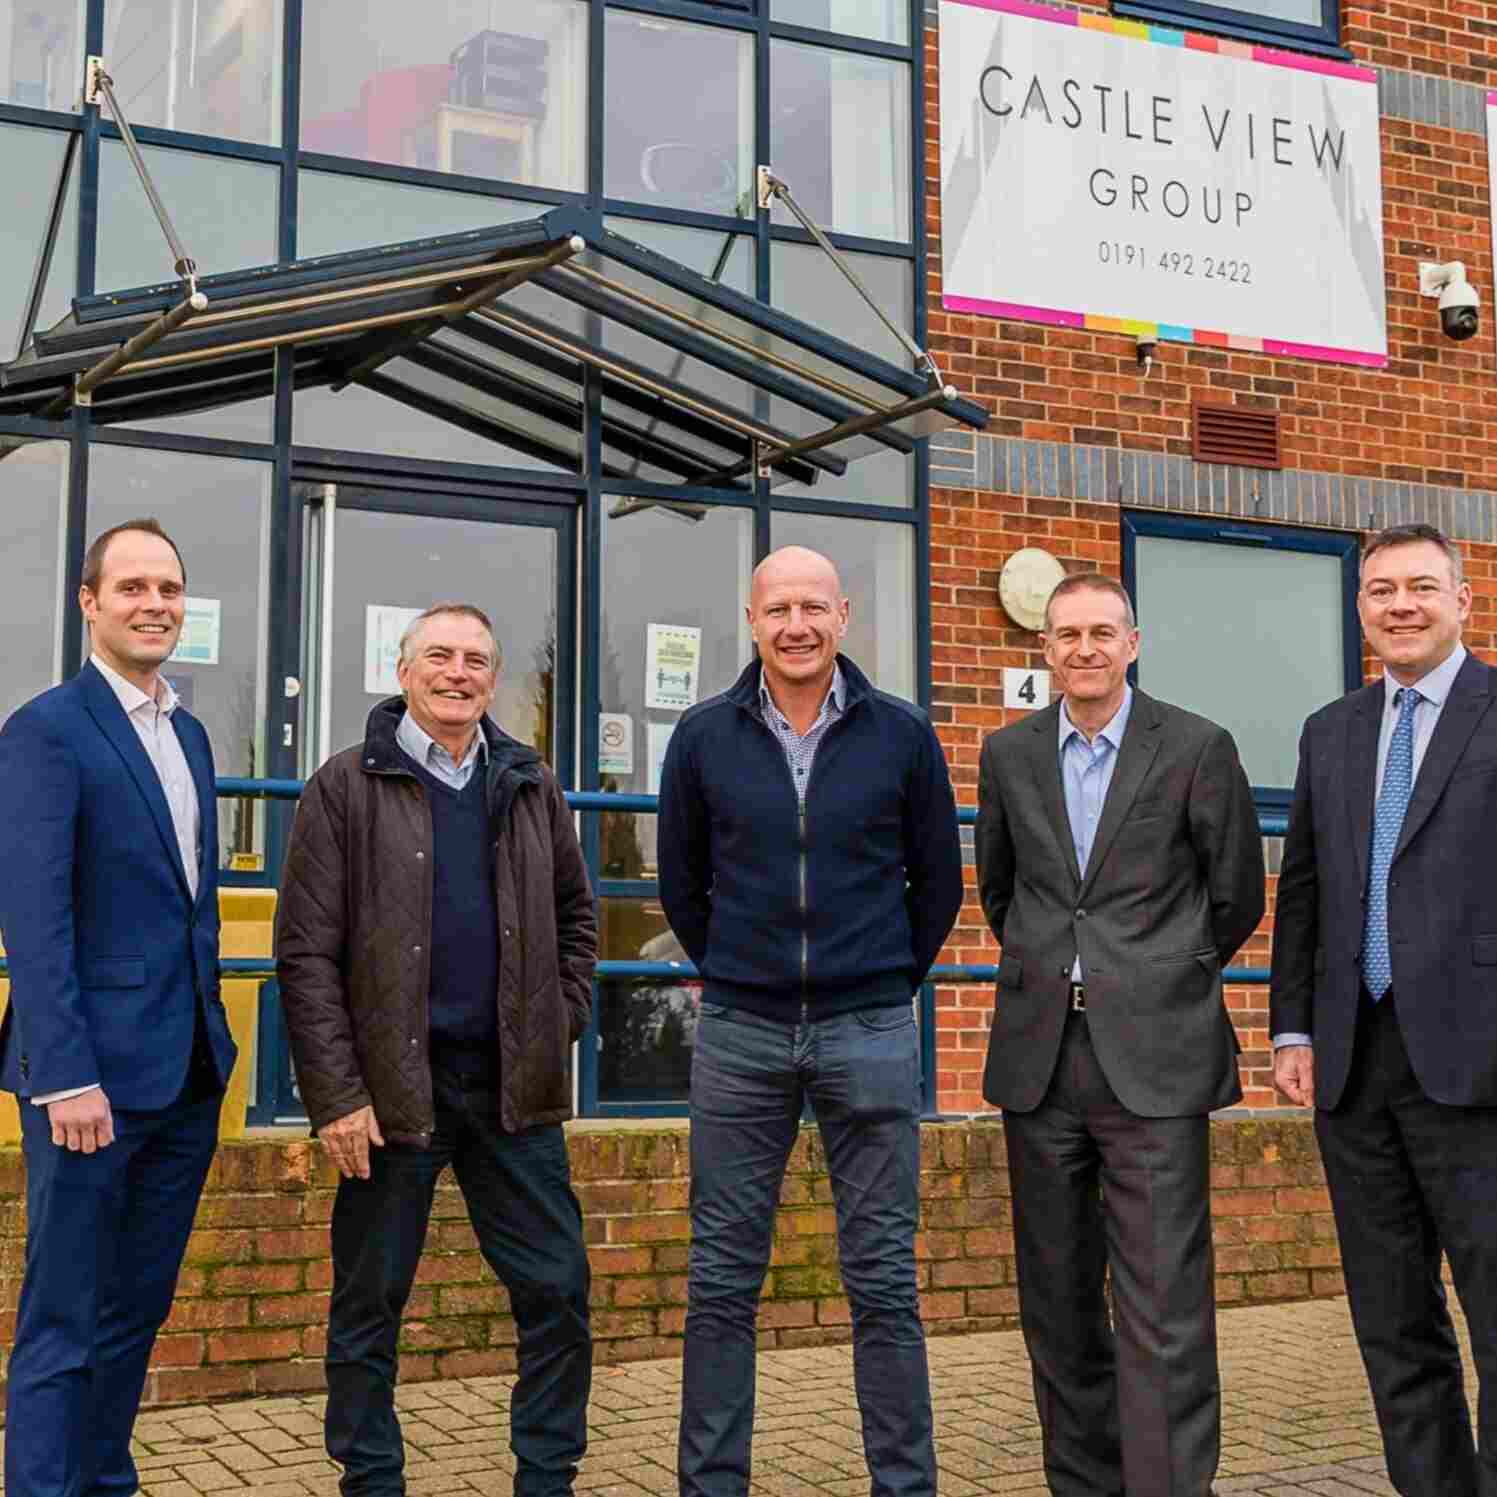 Picture of some of Maven's Investment team with the owners of Castle View Group outside their office